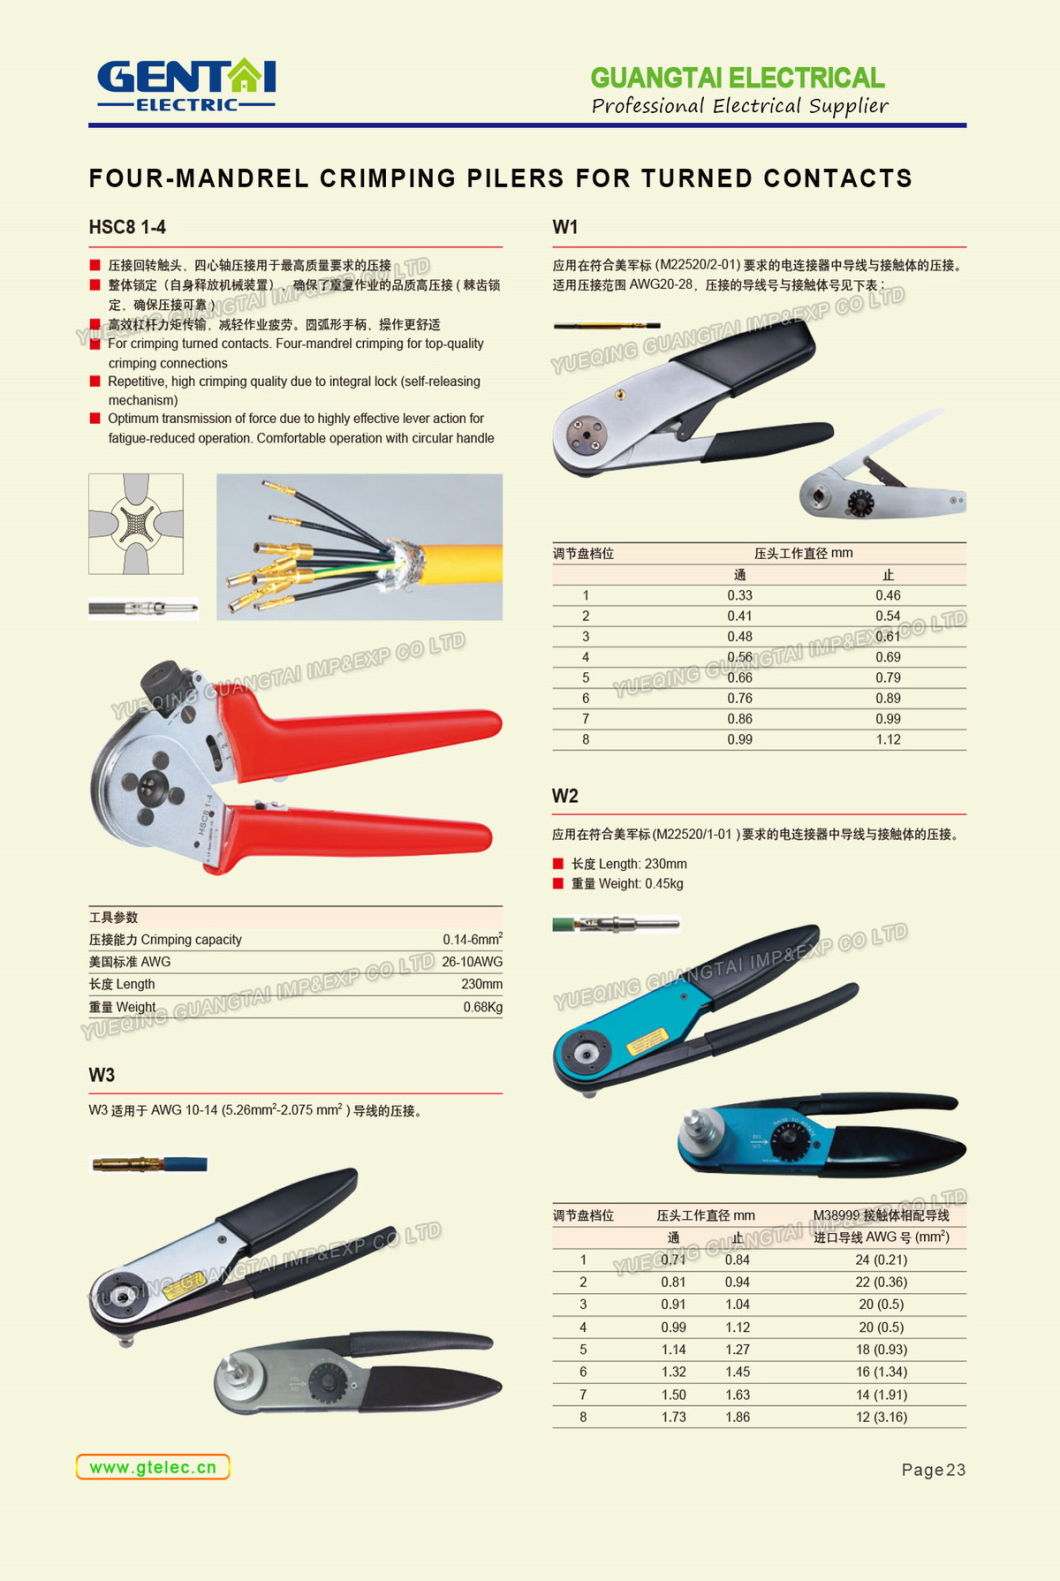 HS-202b Multi-Functional Crimping Plier for Non-Insulated Terminals and Cutting Wires